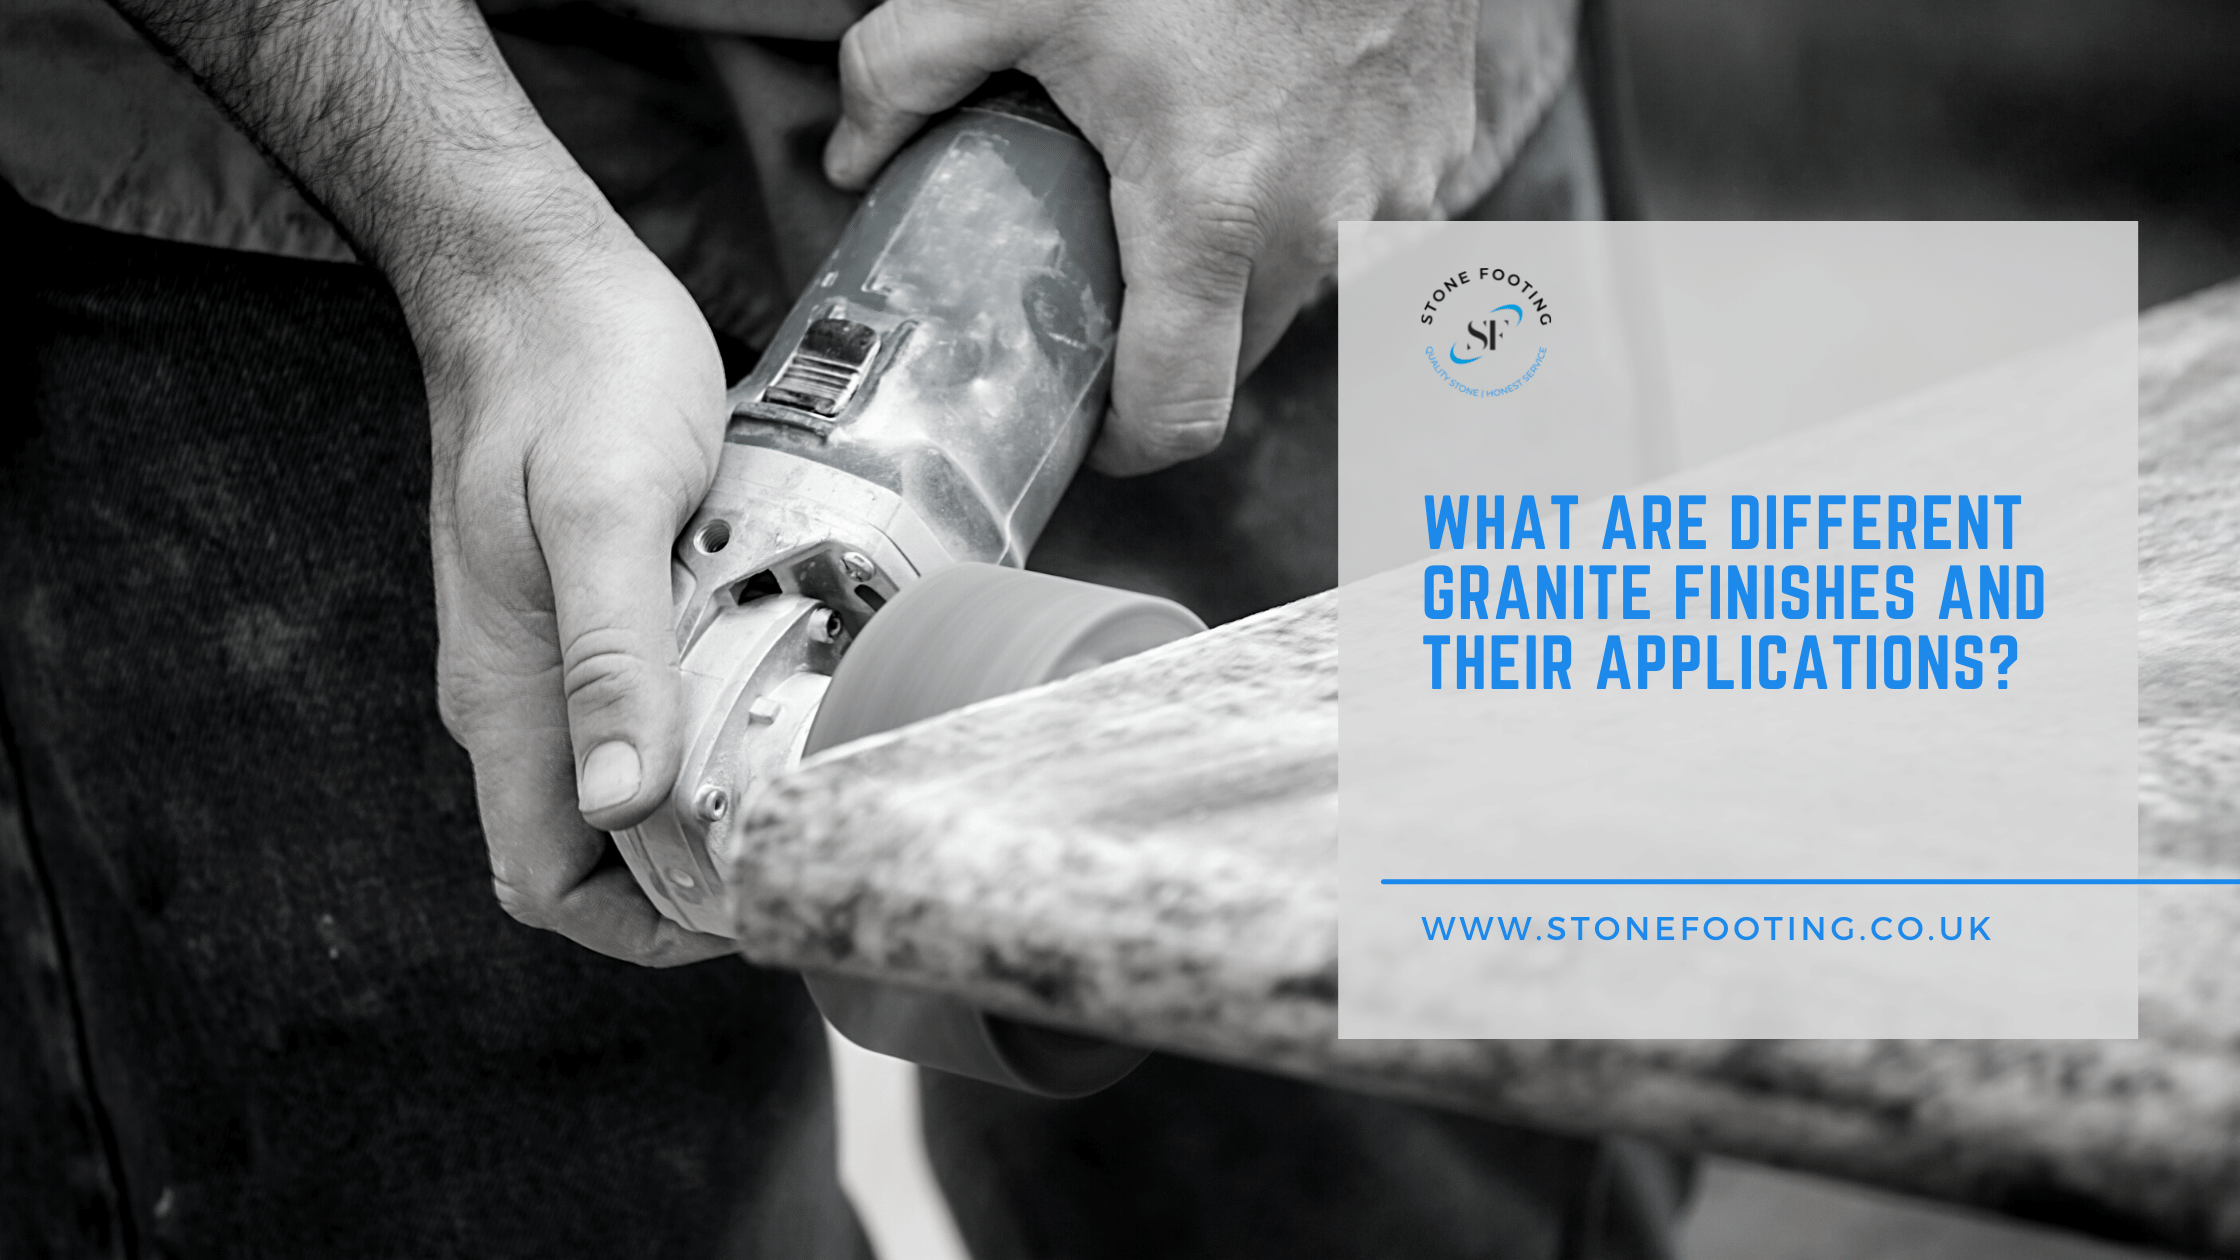 What Are Different Granite Finishes and Their Applications